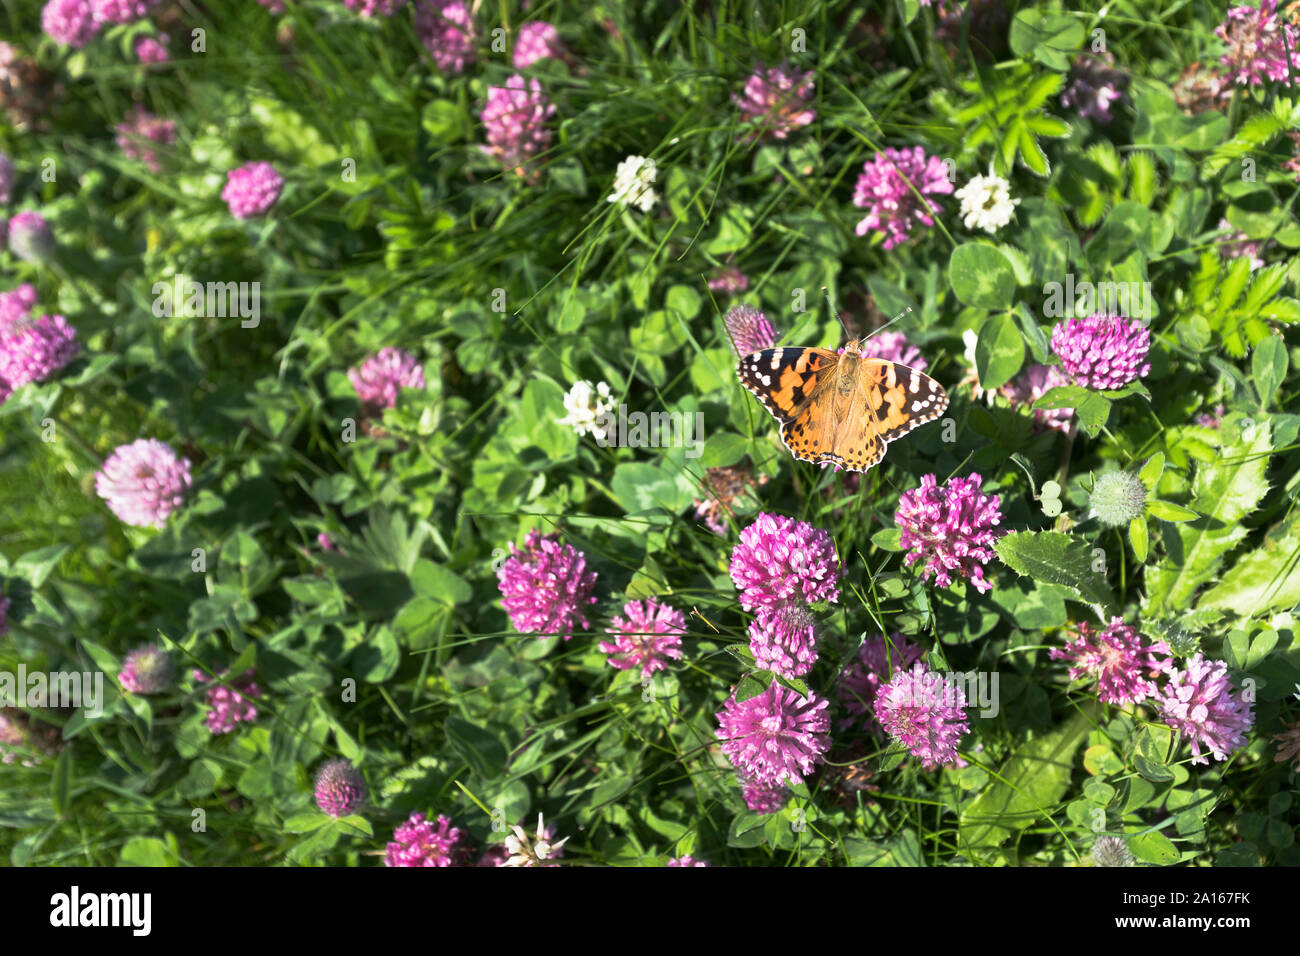 dh Trifolium pratense CLOVERS FLORA Painted lady butterfly Cynthia cardui on pink red purple clover flowers uk butterflies flower Stock Photo